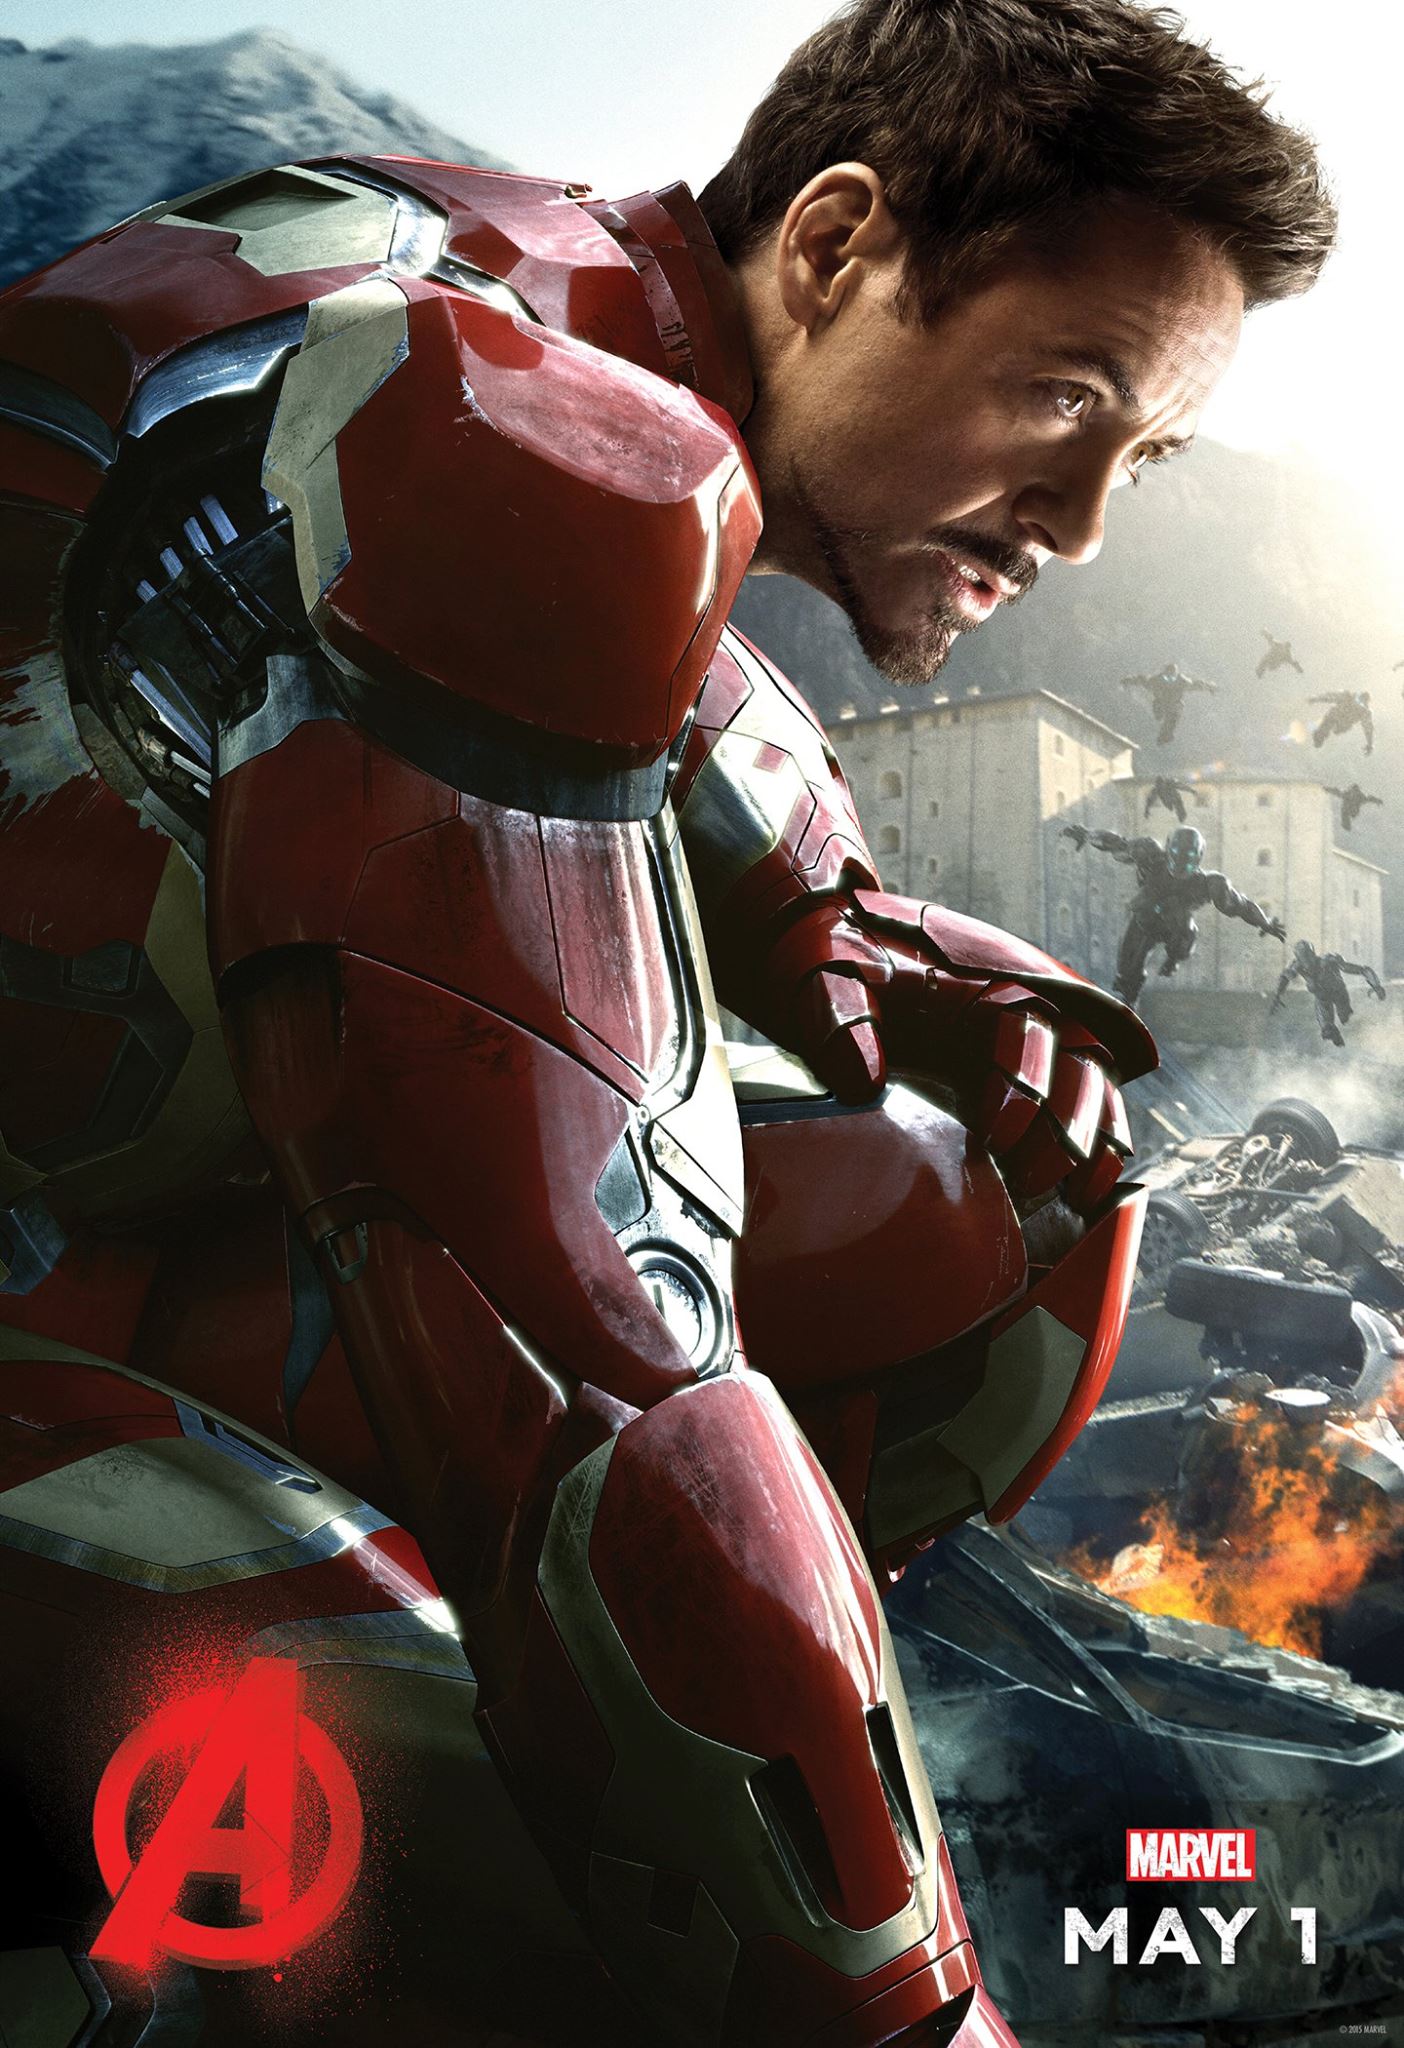 Iron Man Character Poster - Avengers: Age of Ultron